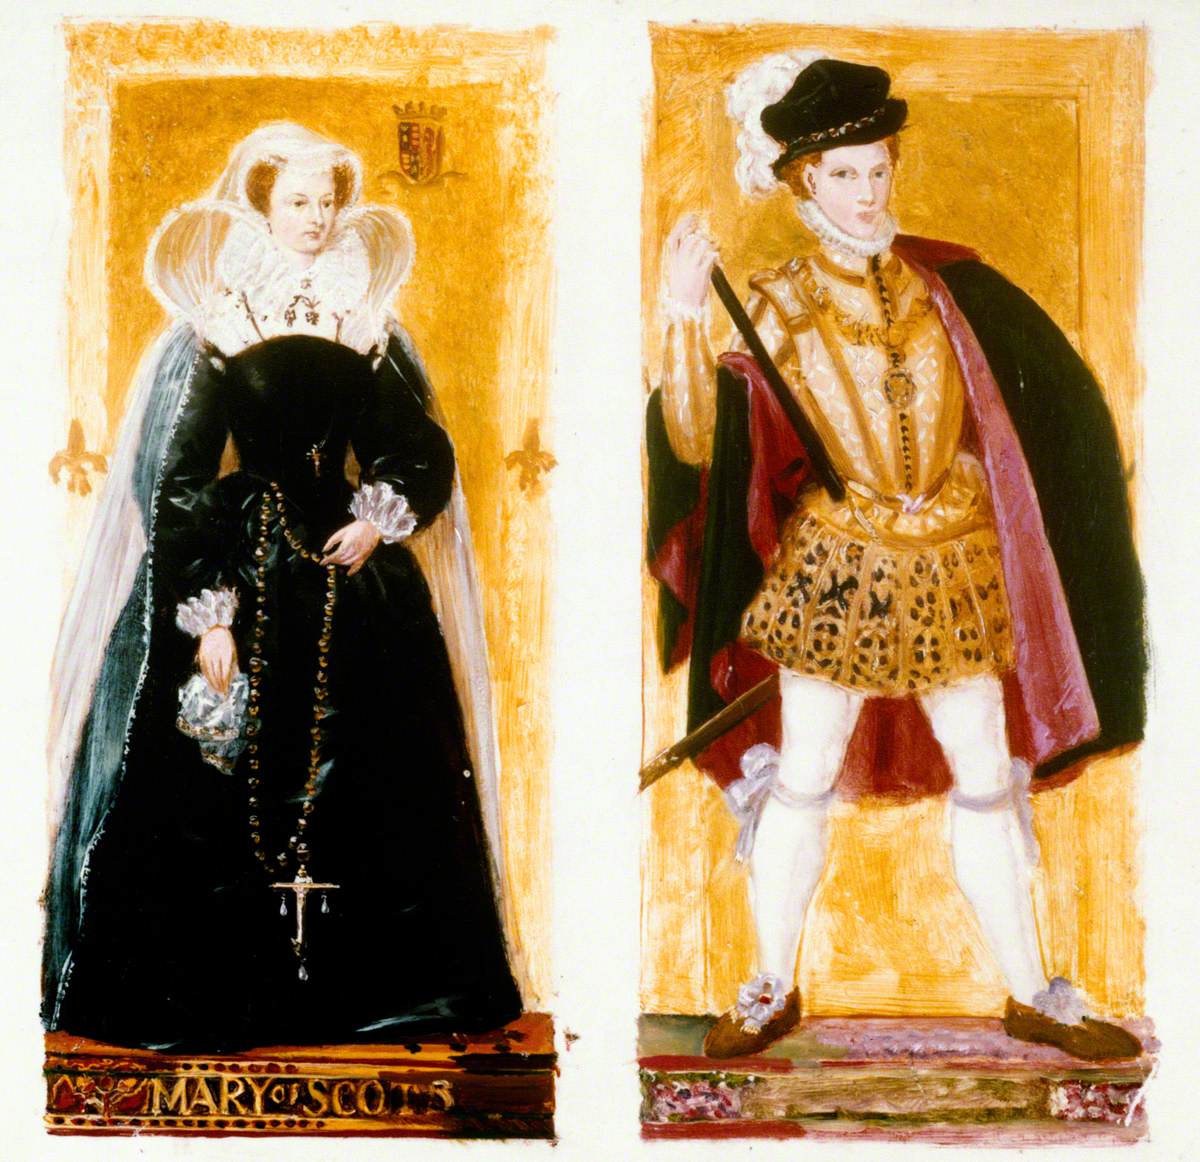 Preparatory Sketches of Mary, Queen of Scots and Lord Darnley